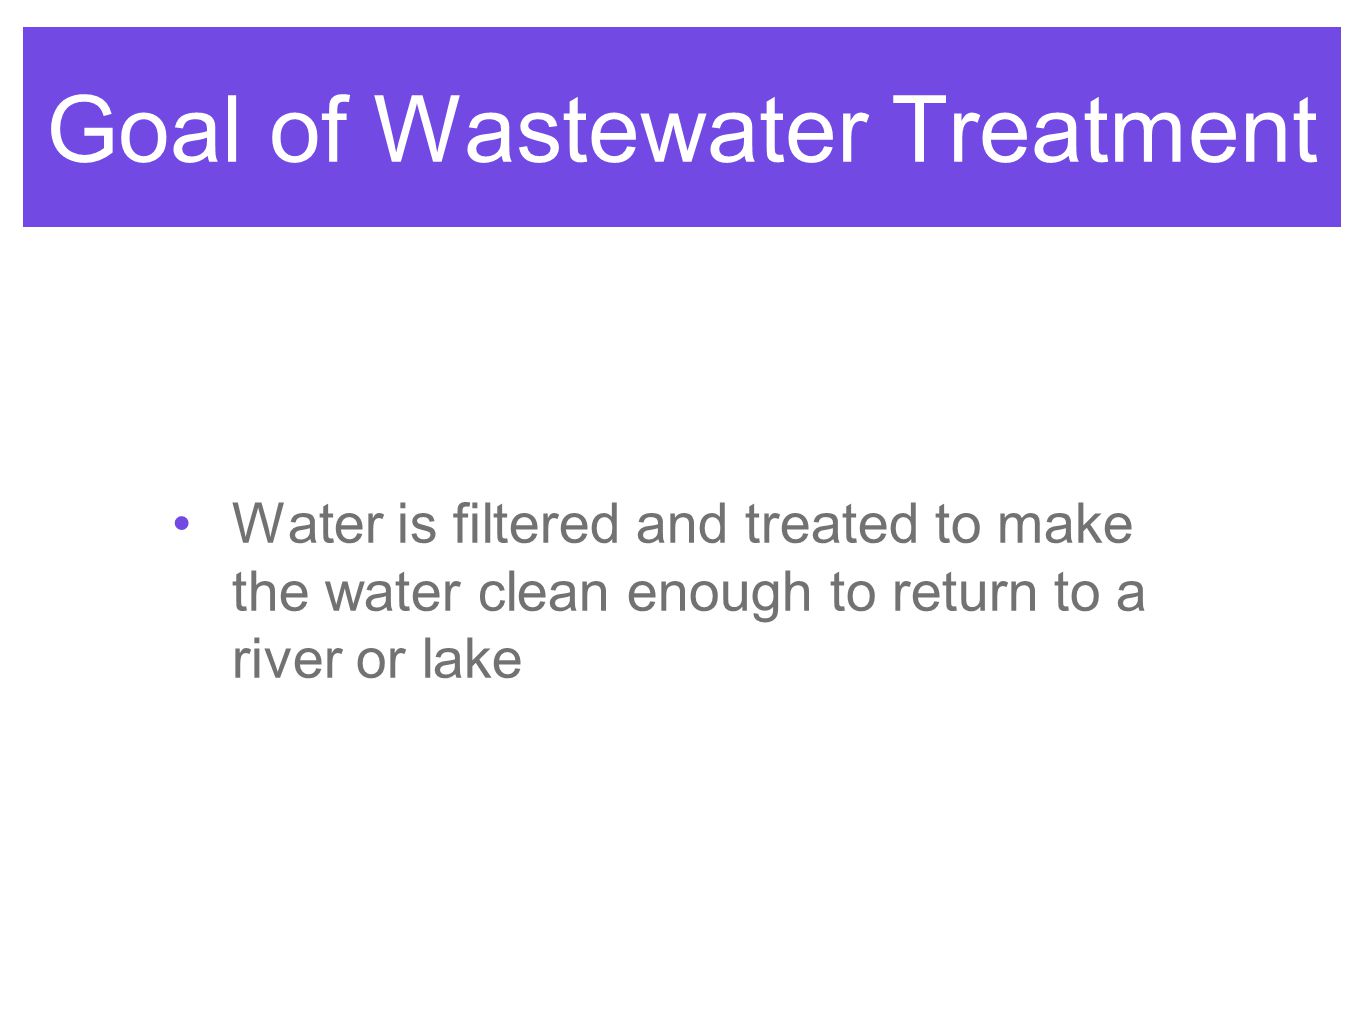 Goal of Wastewater Treatment